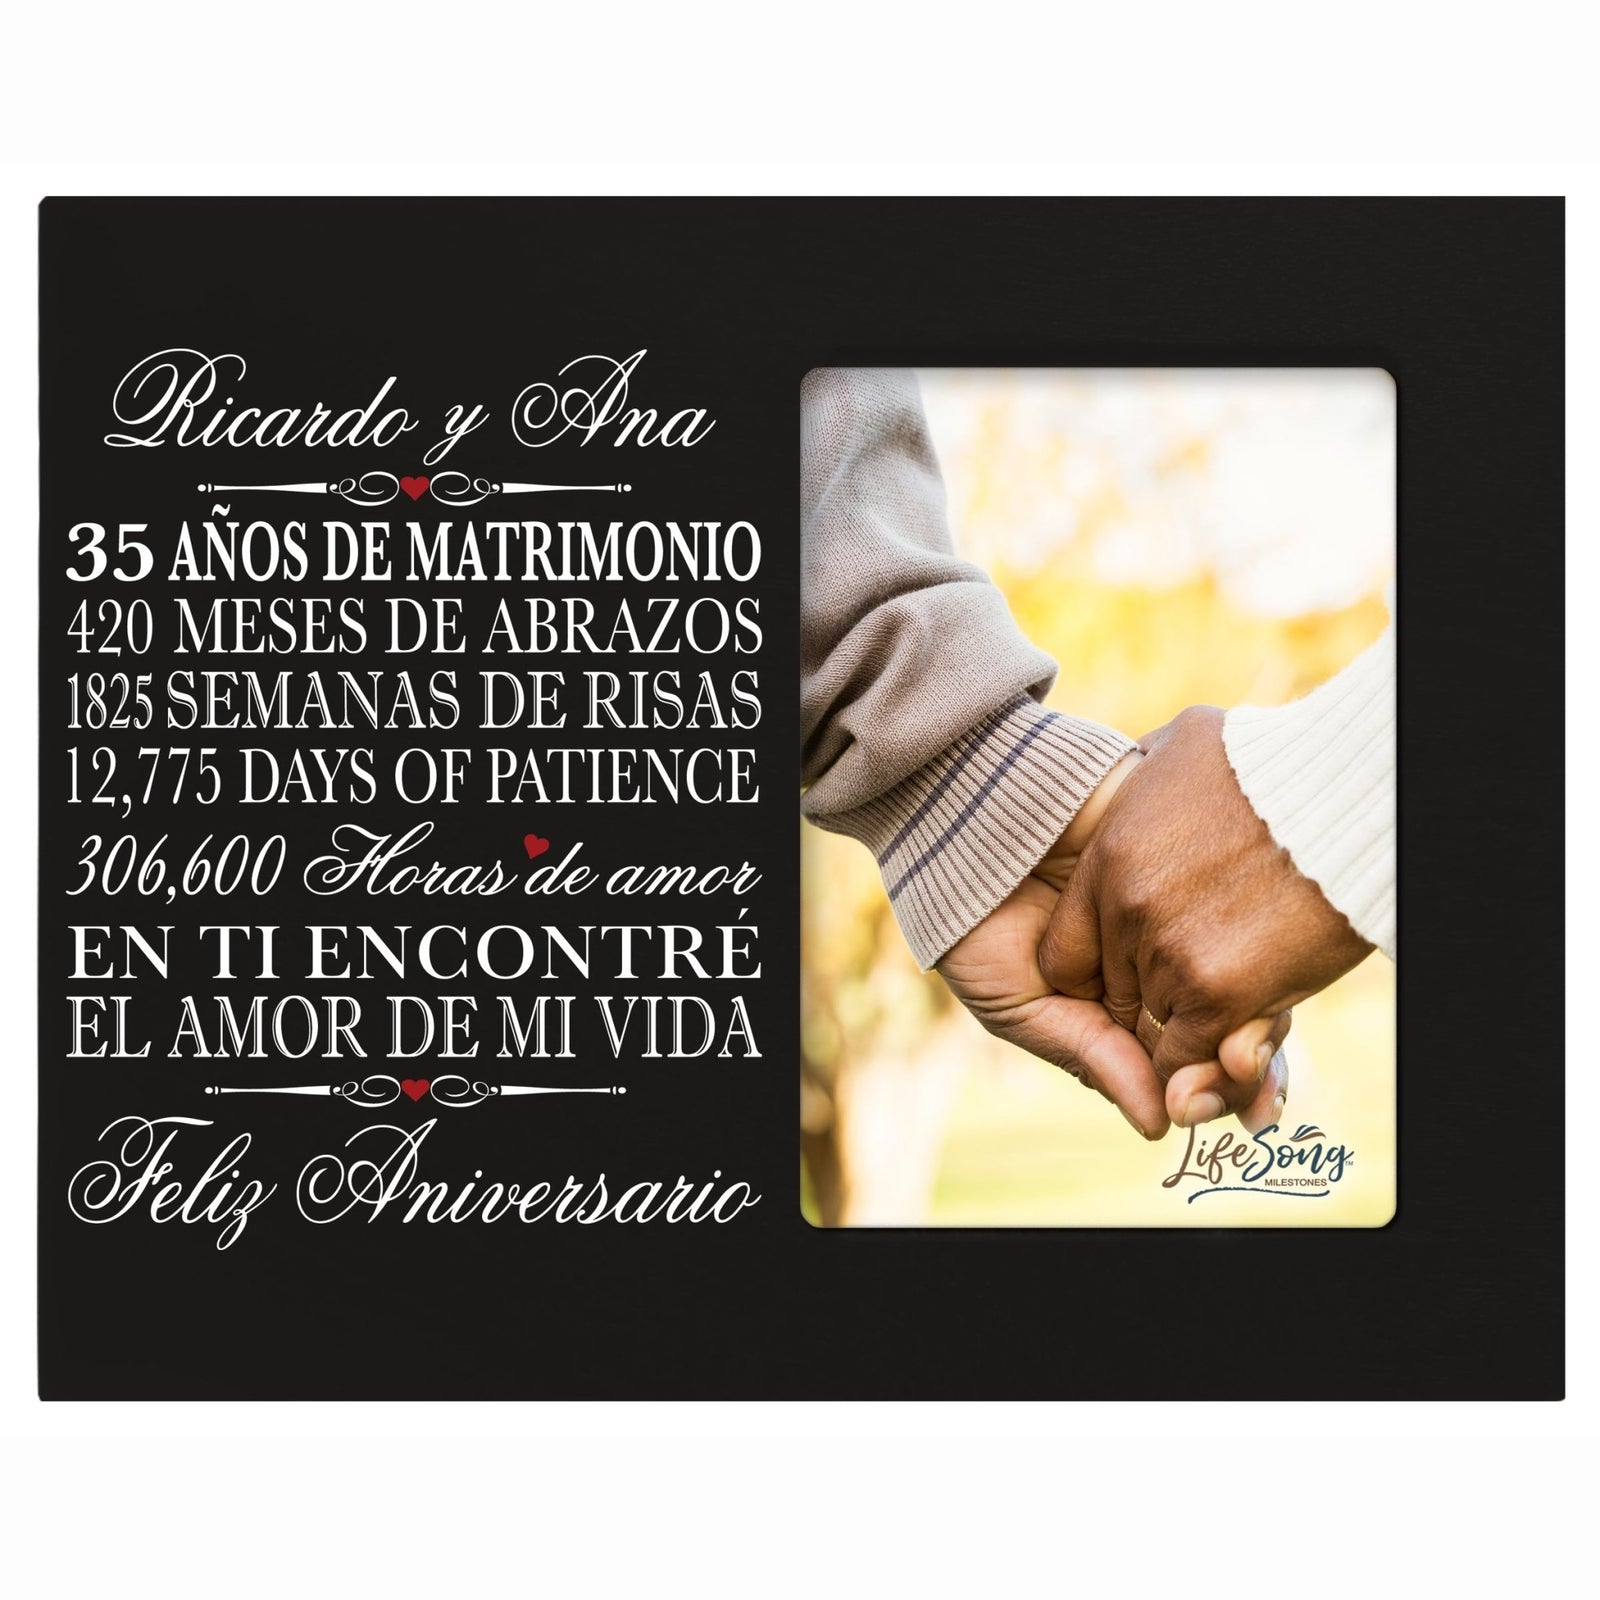 Personalized Anniversary Frames with Spanish Verse - 35th Anniversary - LifeSong Milestones